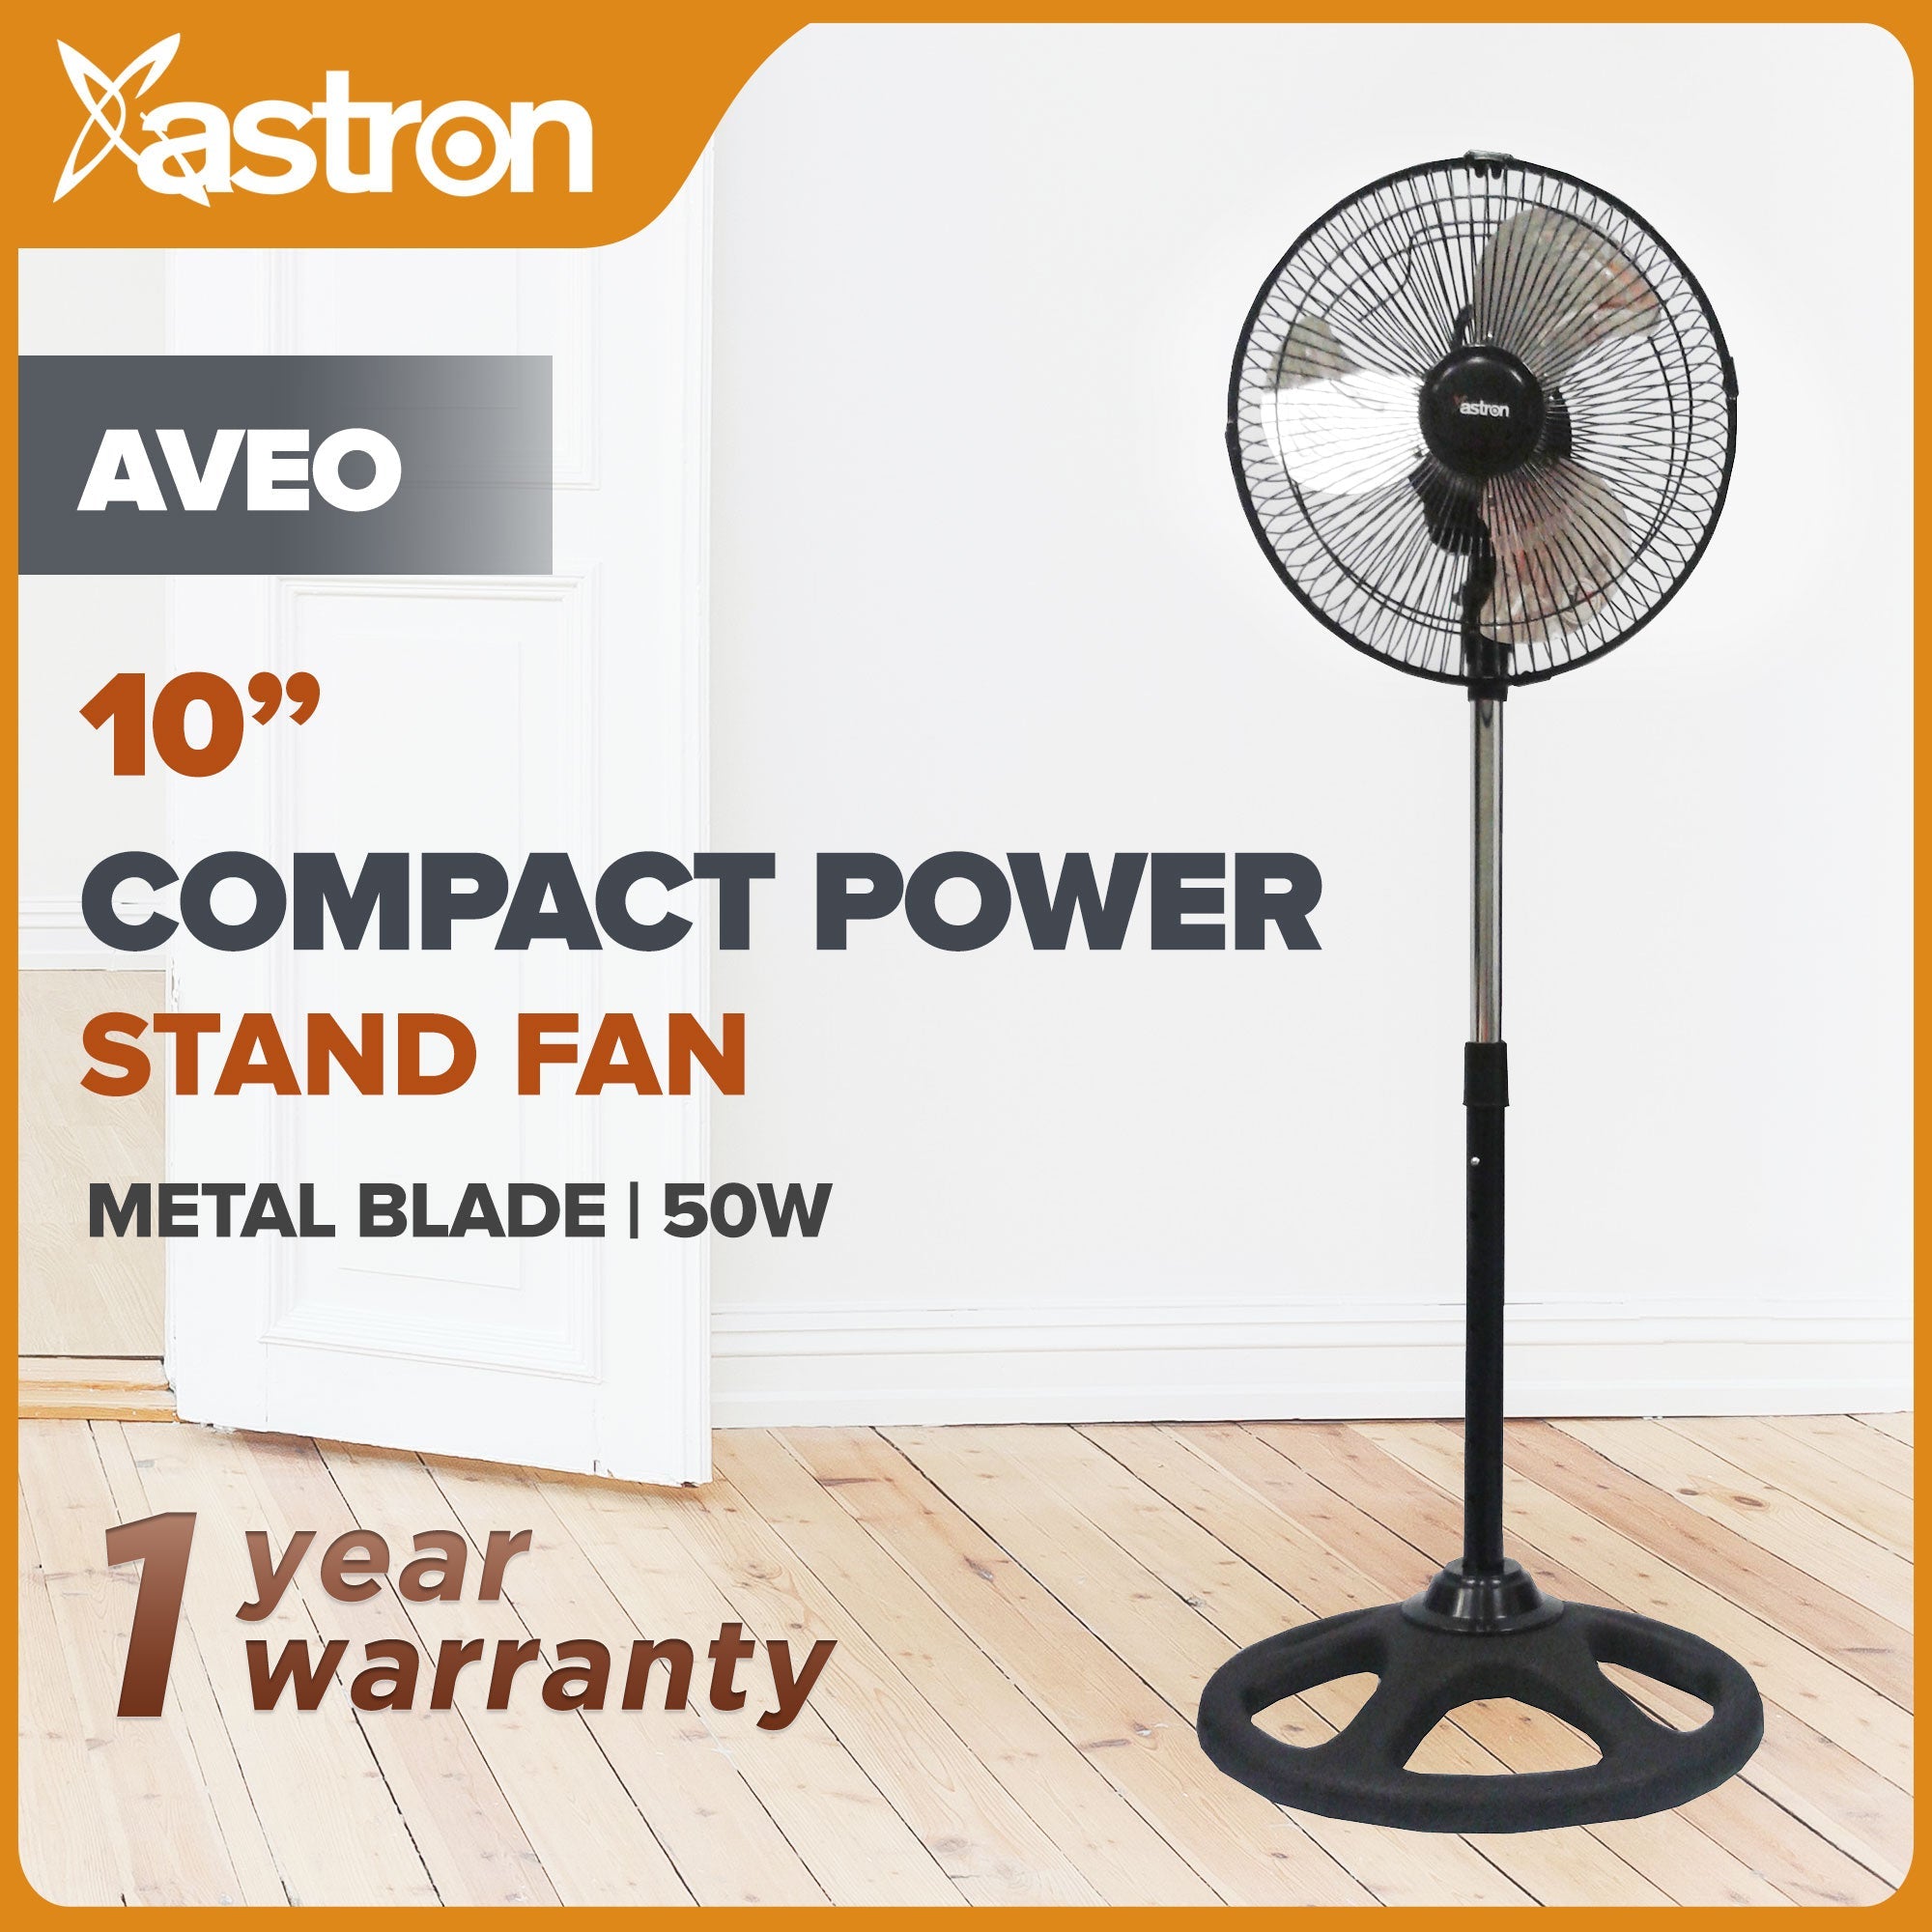 ASTRON Aveo Stand Fan 10" Astron